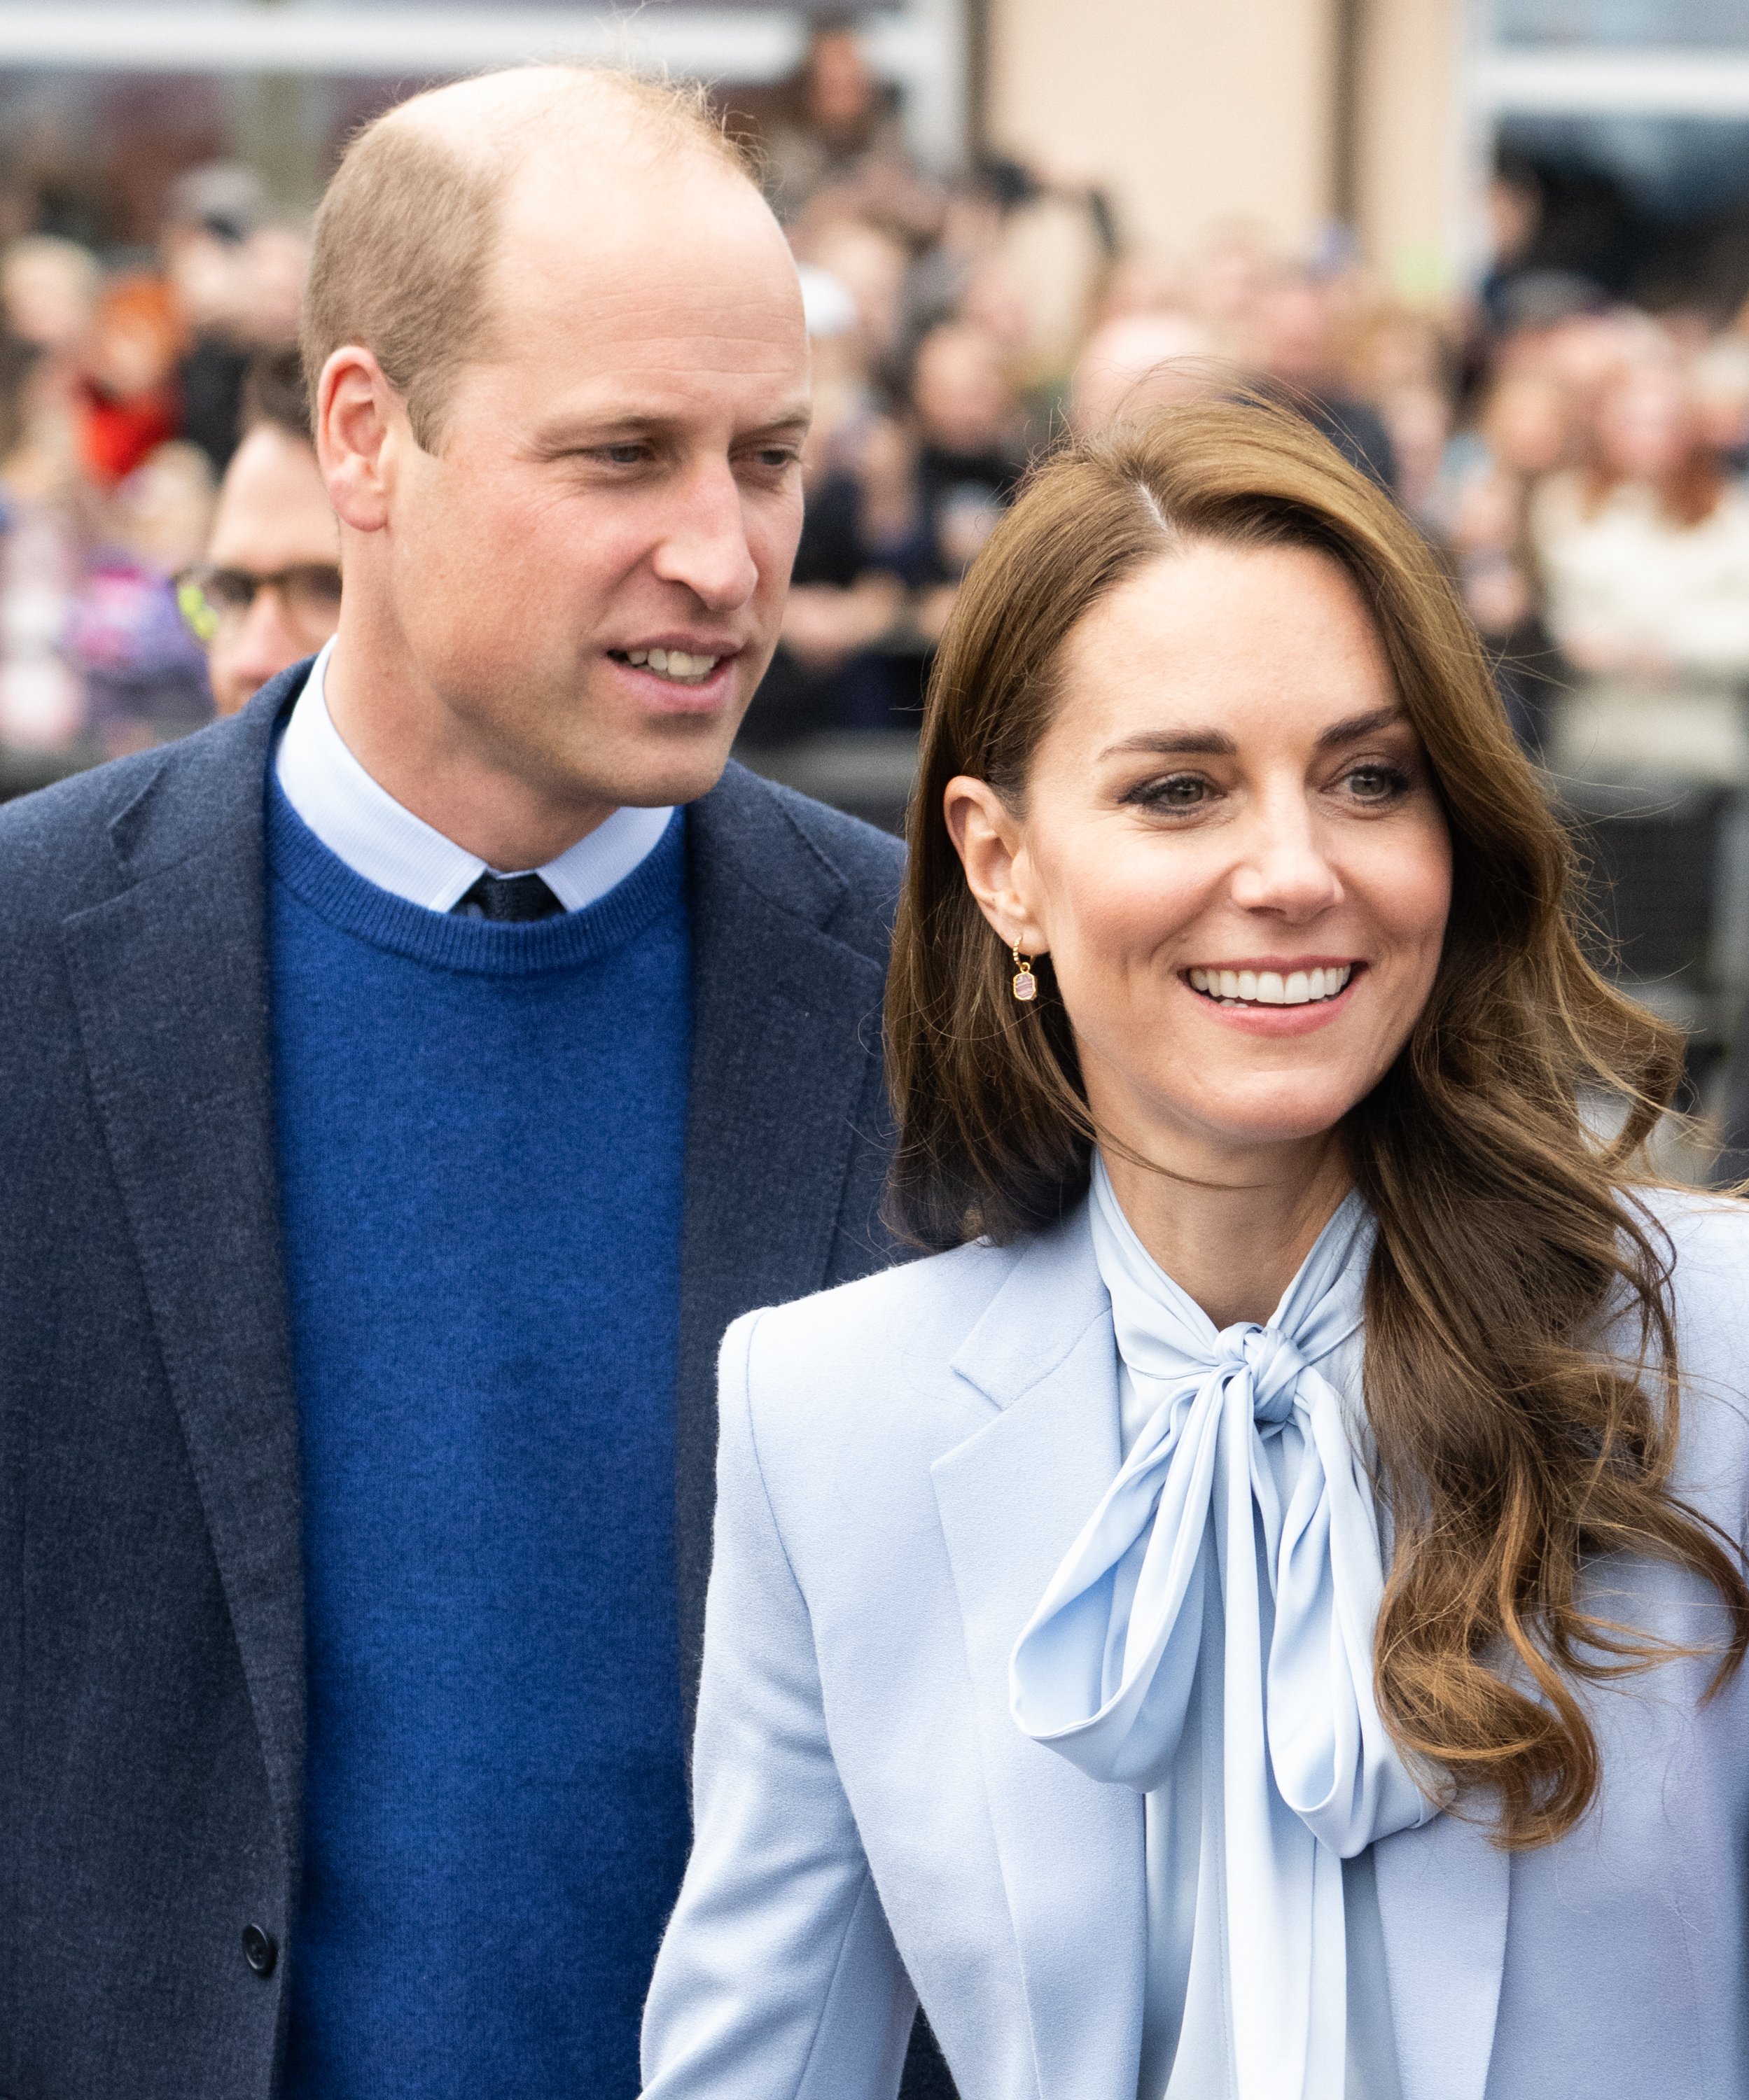 Prince William and his wife Kate Middleton during a visit to Carrickfergus on October 6, 2022 in Carrickfergus, Northern Ireland ┃Source: Getty Images